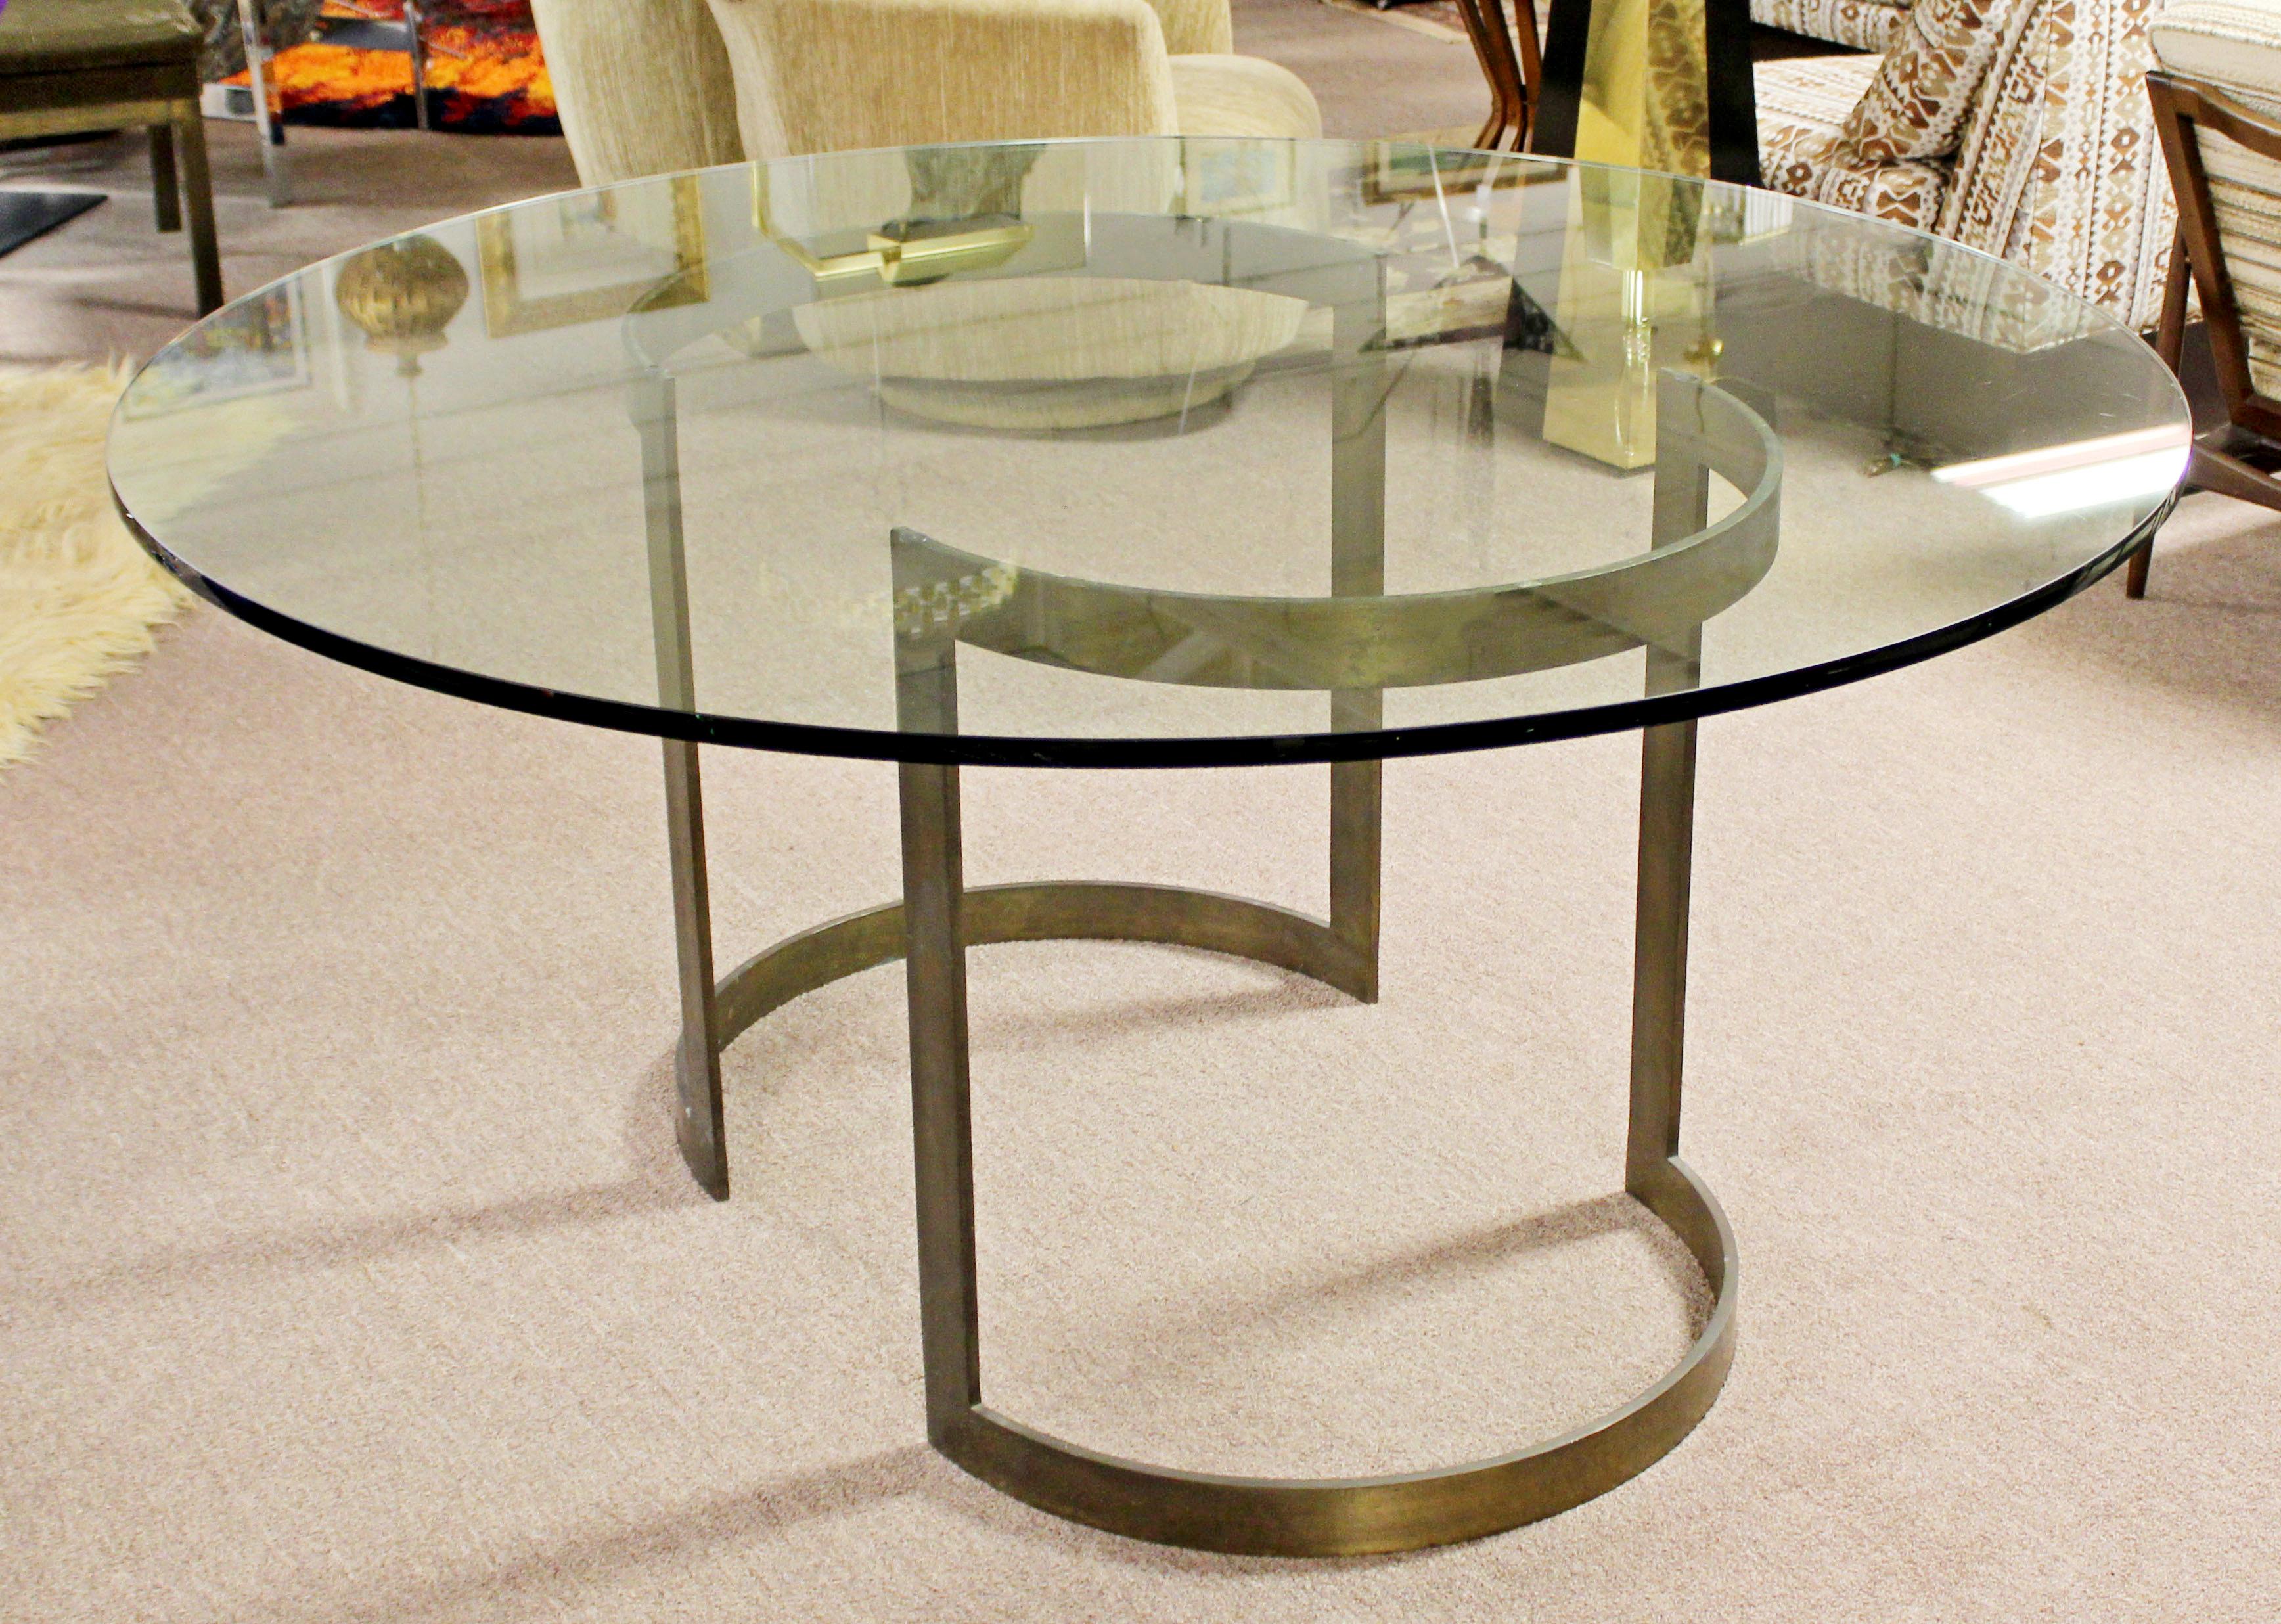 For your consideration is a stunning dining table, with two half moon bronze bases and a circular glass top, by Milo Baughman for Thayer Coggin, circa 1970s. In very good patinated condition. Base can also be used as a desk by putting a rectangular